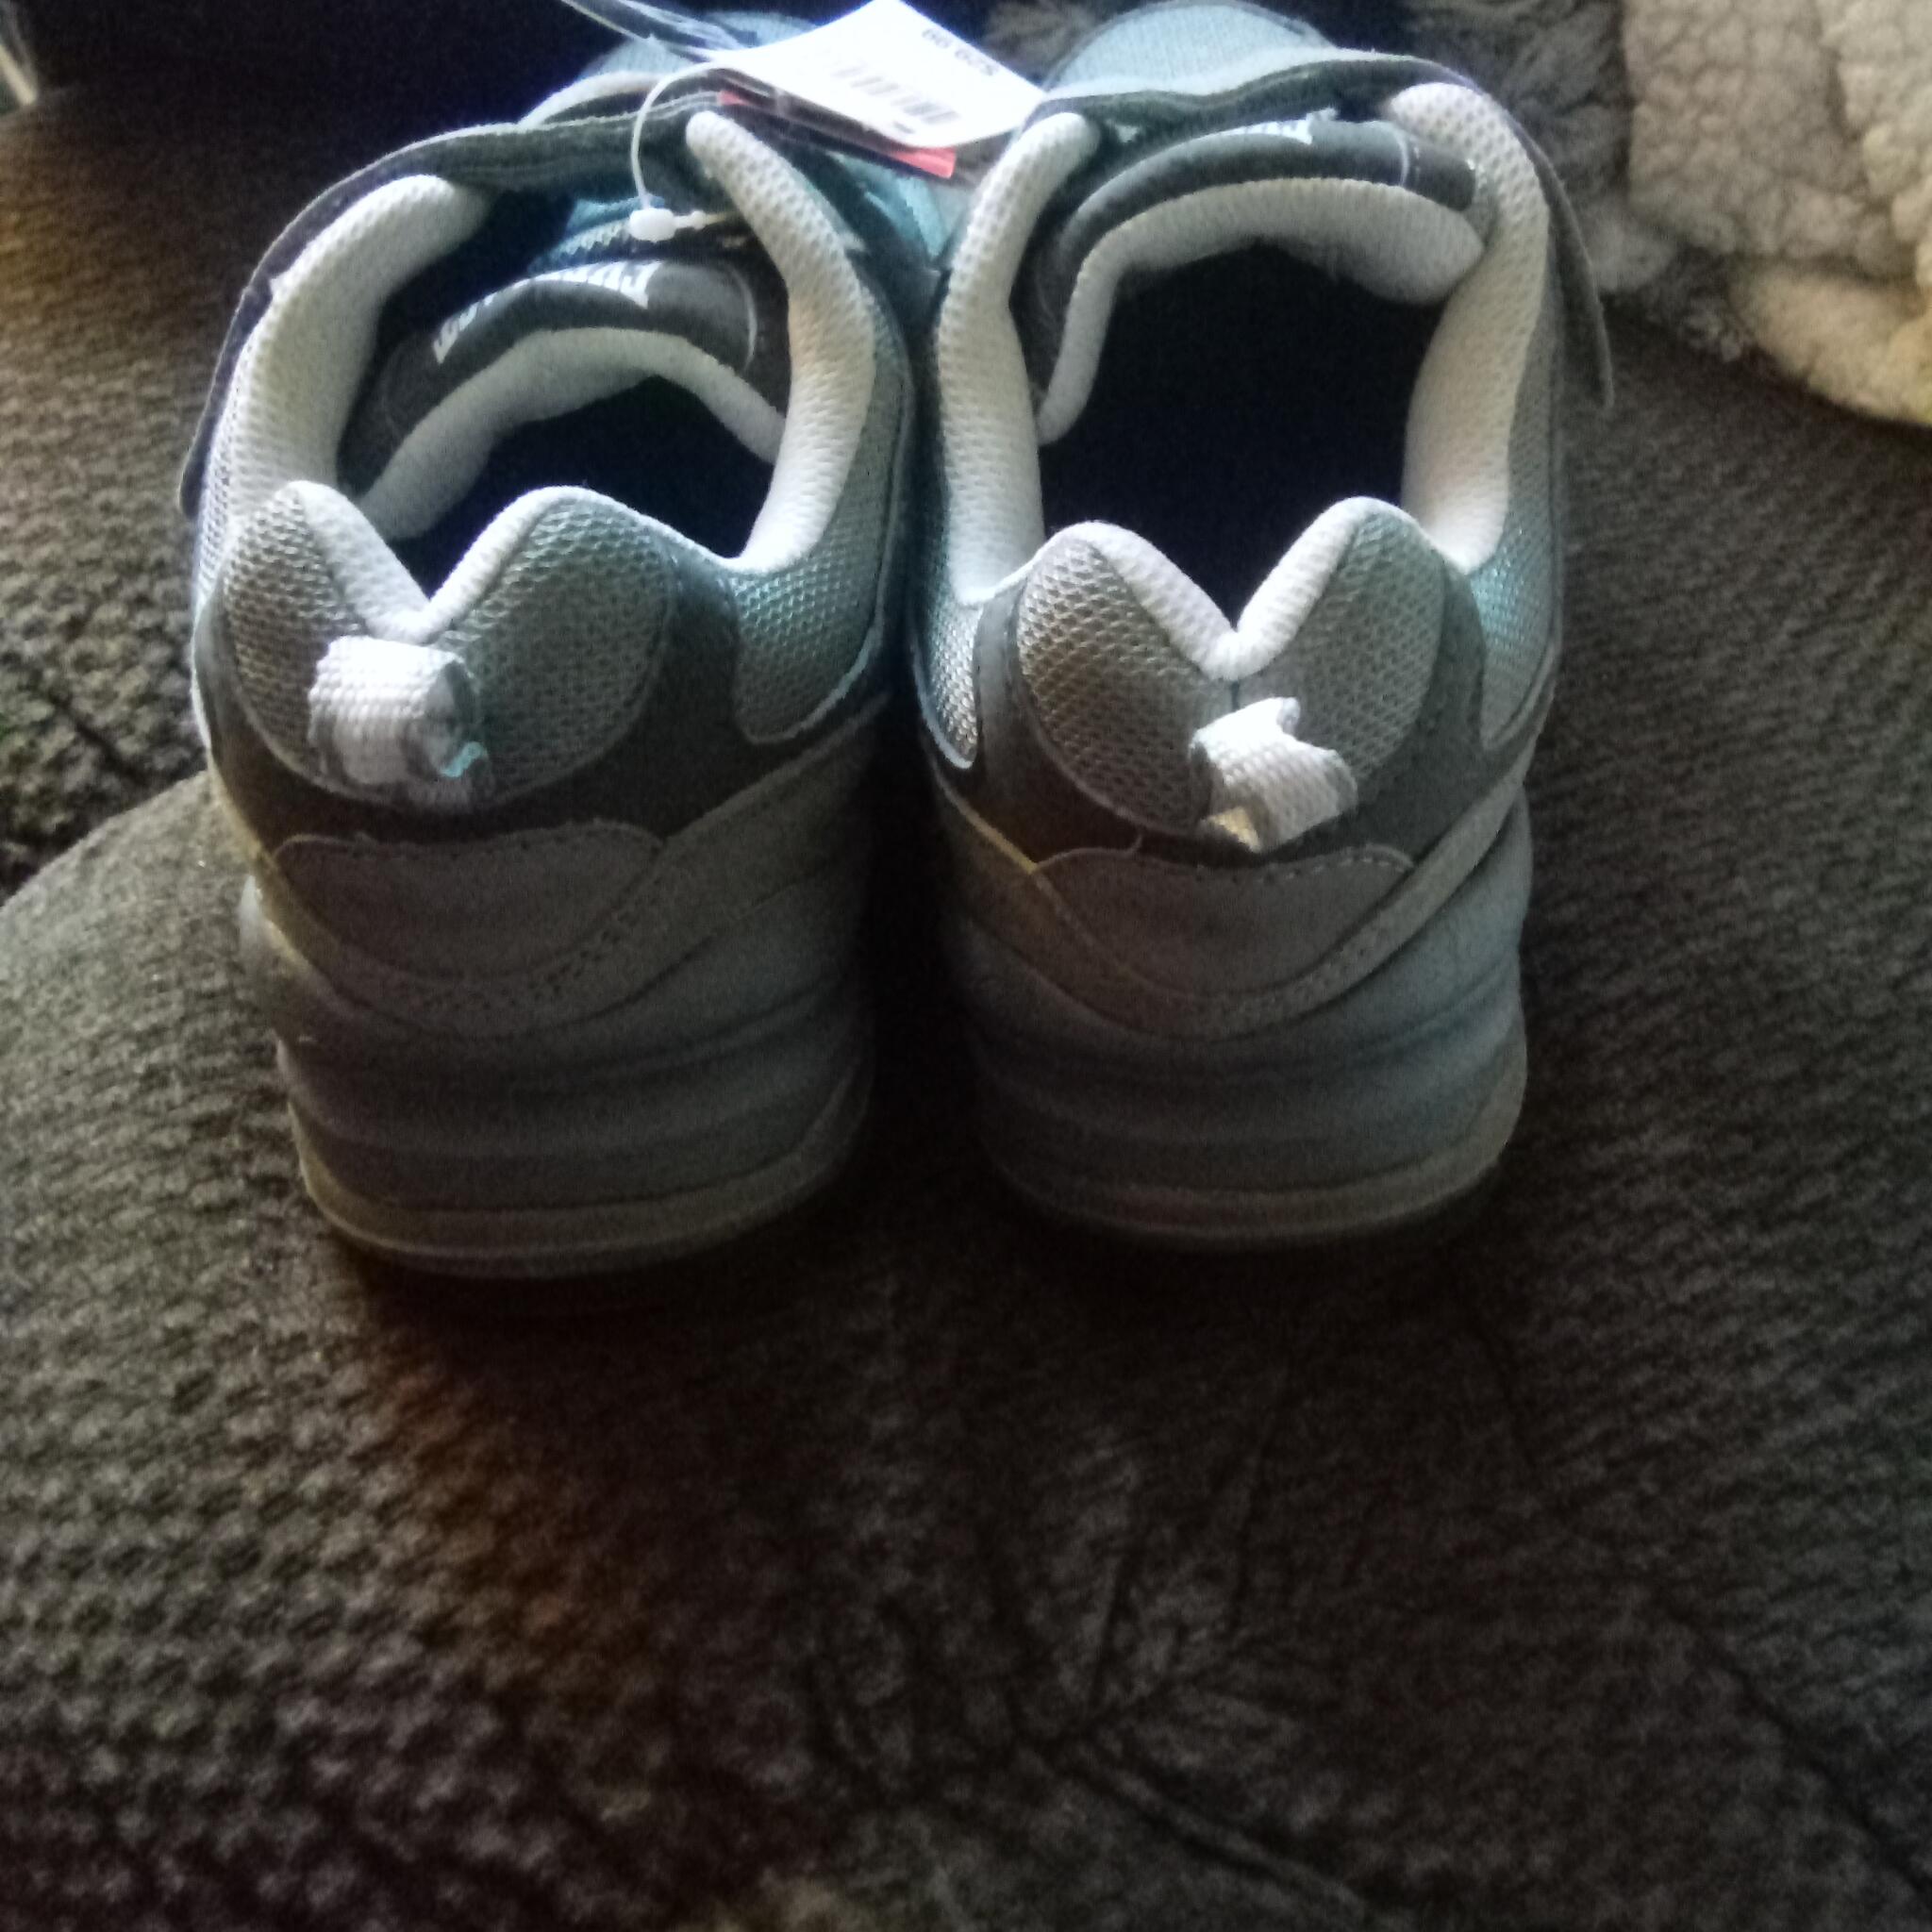 Everlast shoes size 8 $20 for $20 in Highland Heights, KY | For Sale ...